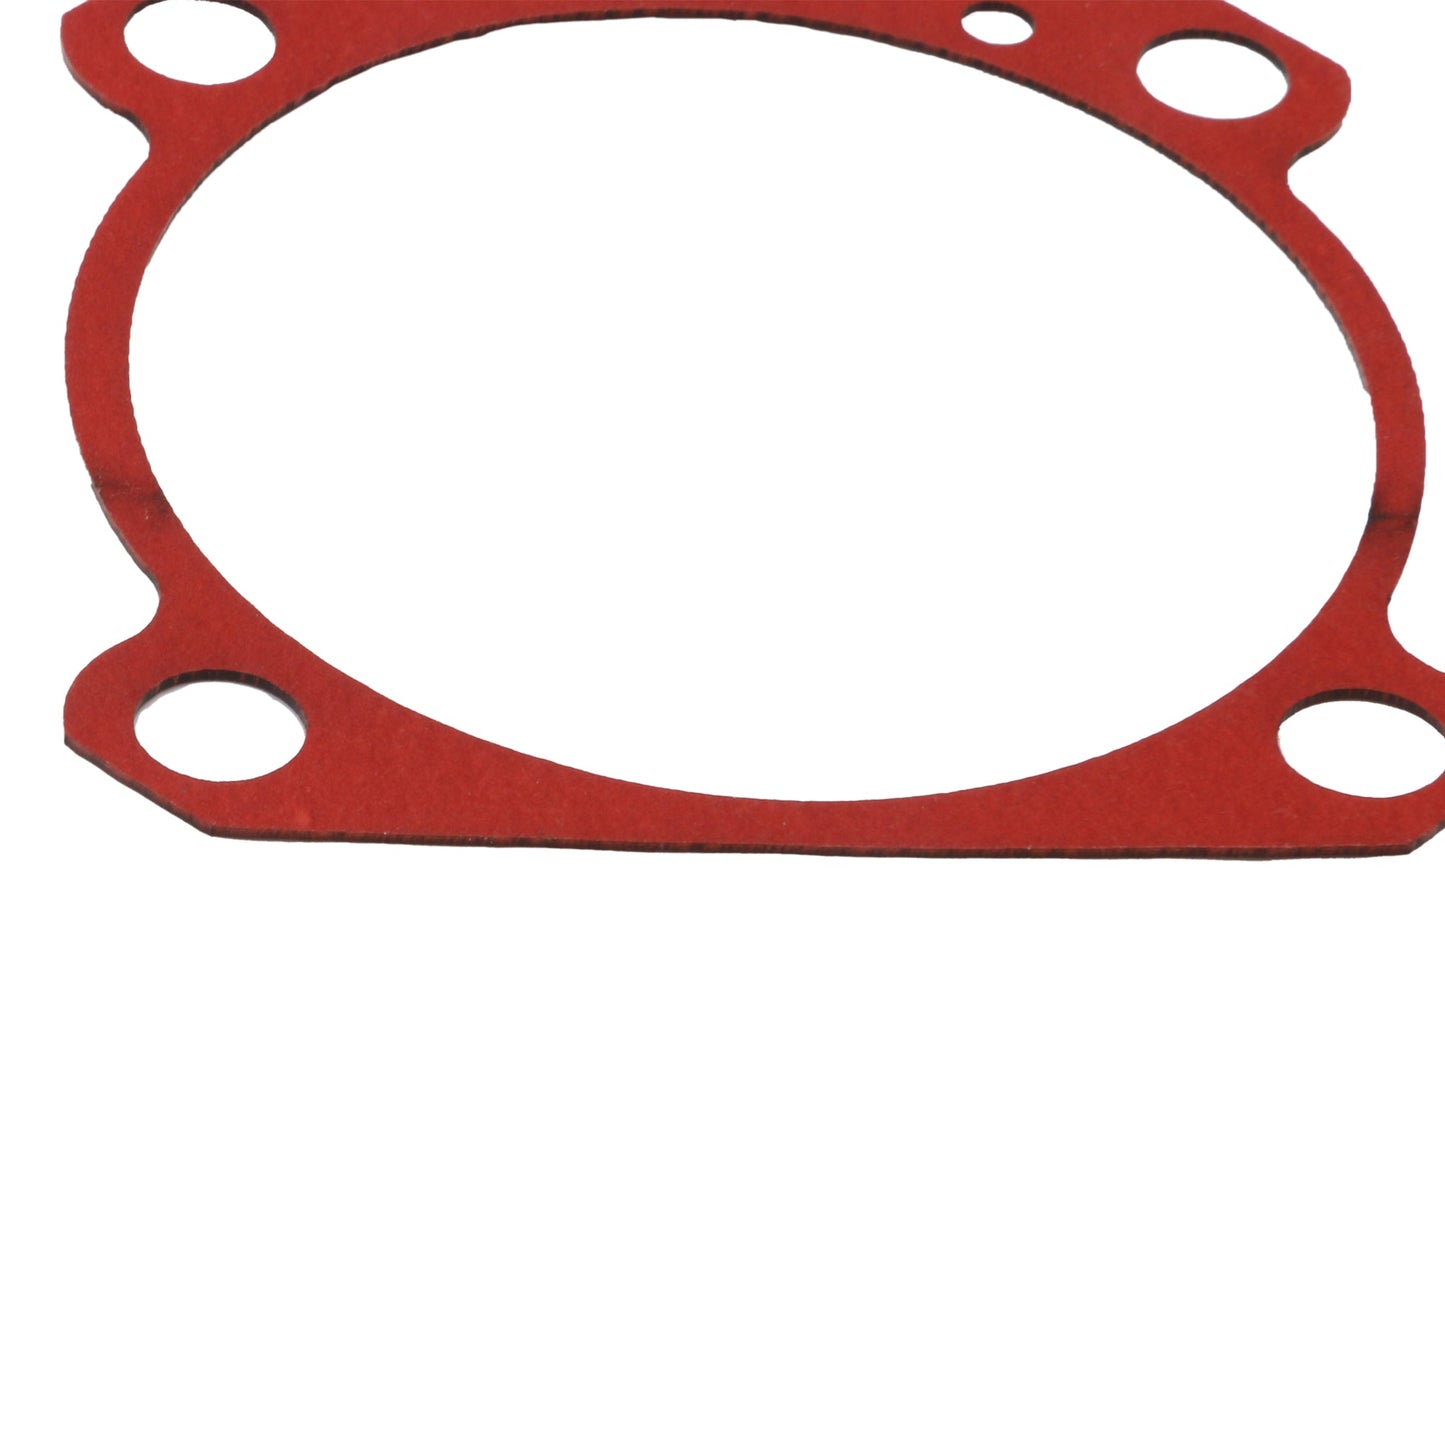 BQLZR Red Air Nailer Gasket Kits Replacement for Hitachi NR83 and NV83 Pack of 5